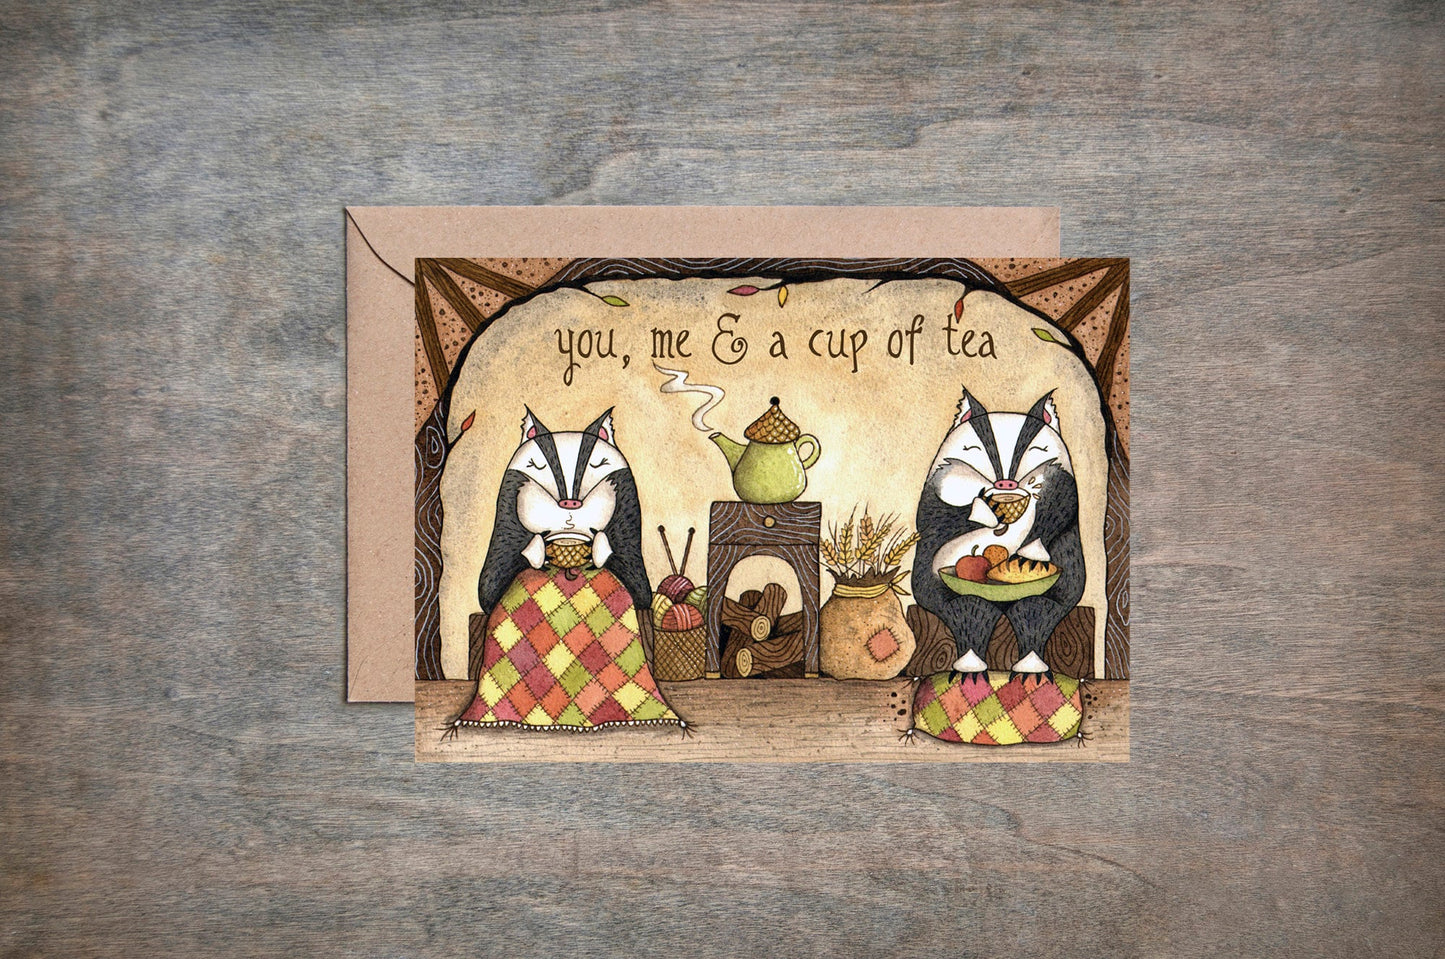 Badger Valentines Day Card & Envelope - Cosy Badgers Drinking Tea Card - Whimsical Nature Teapot Birthday Anniversary Love Birthday Card